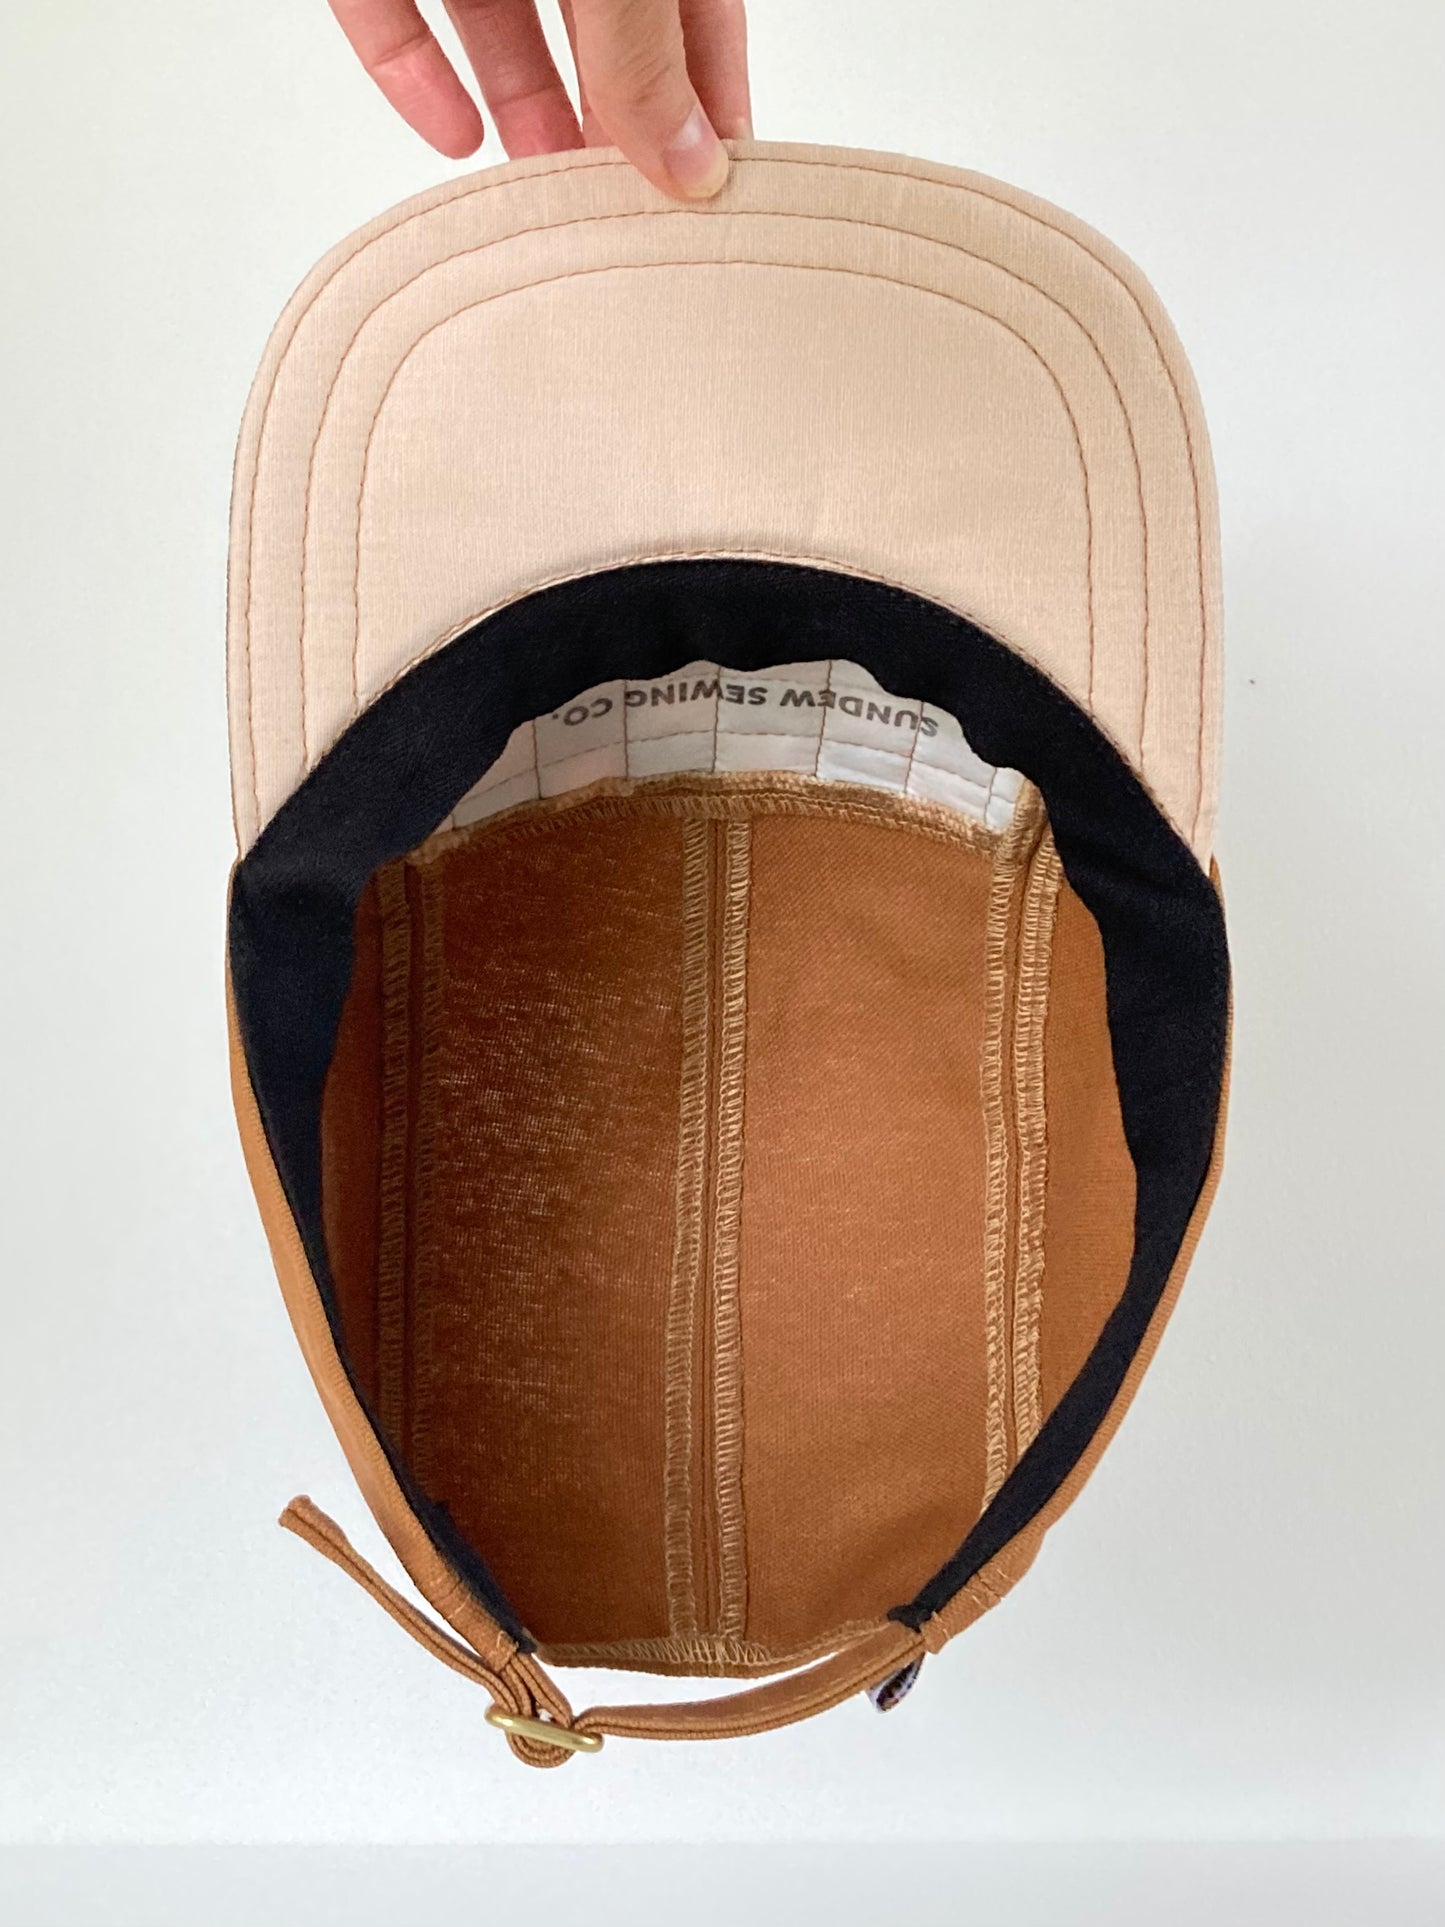 Quilted Camp Hat - Checkerboard Olive Blush